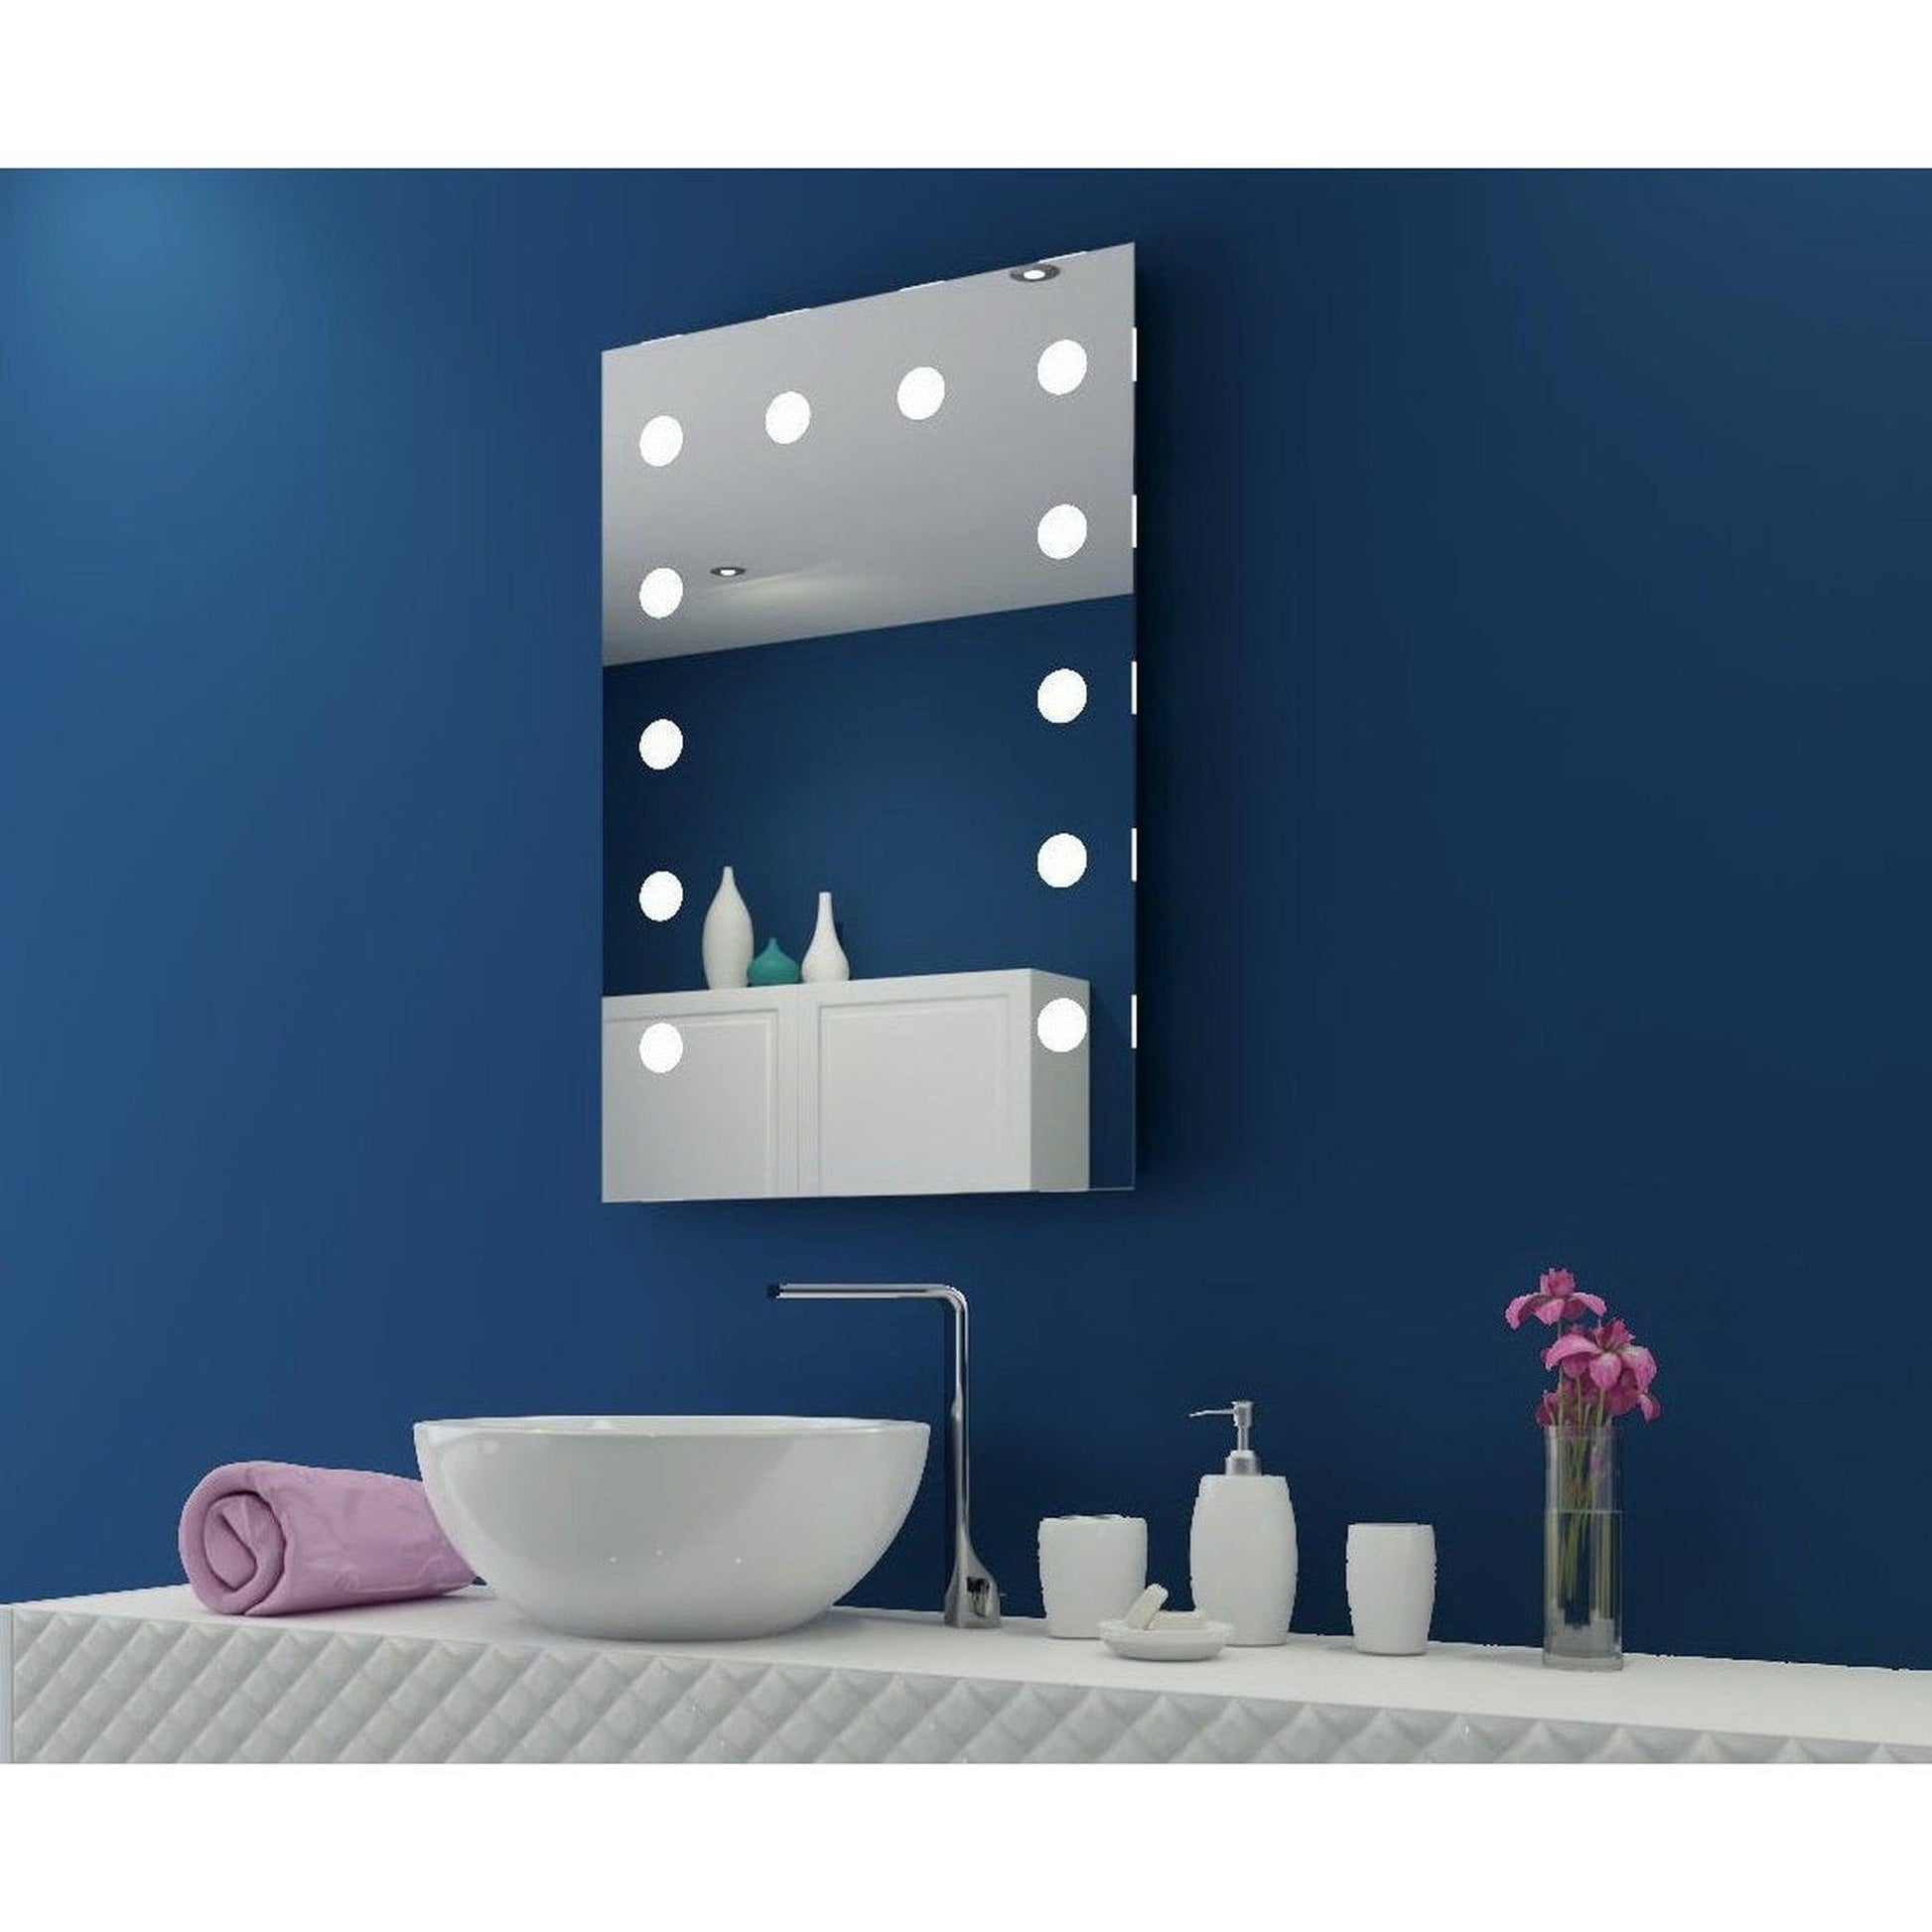 Paris Mirror Hollywood 24" x 36" Front-Lit Lighted Super Bright Dimmable Wall-Mounted 6000K LED Mirror